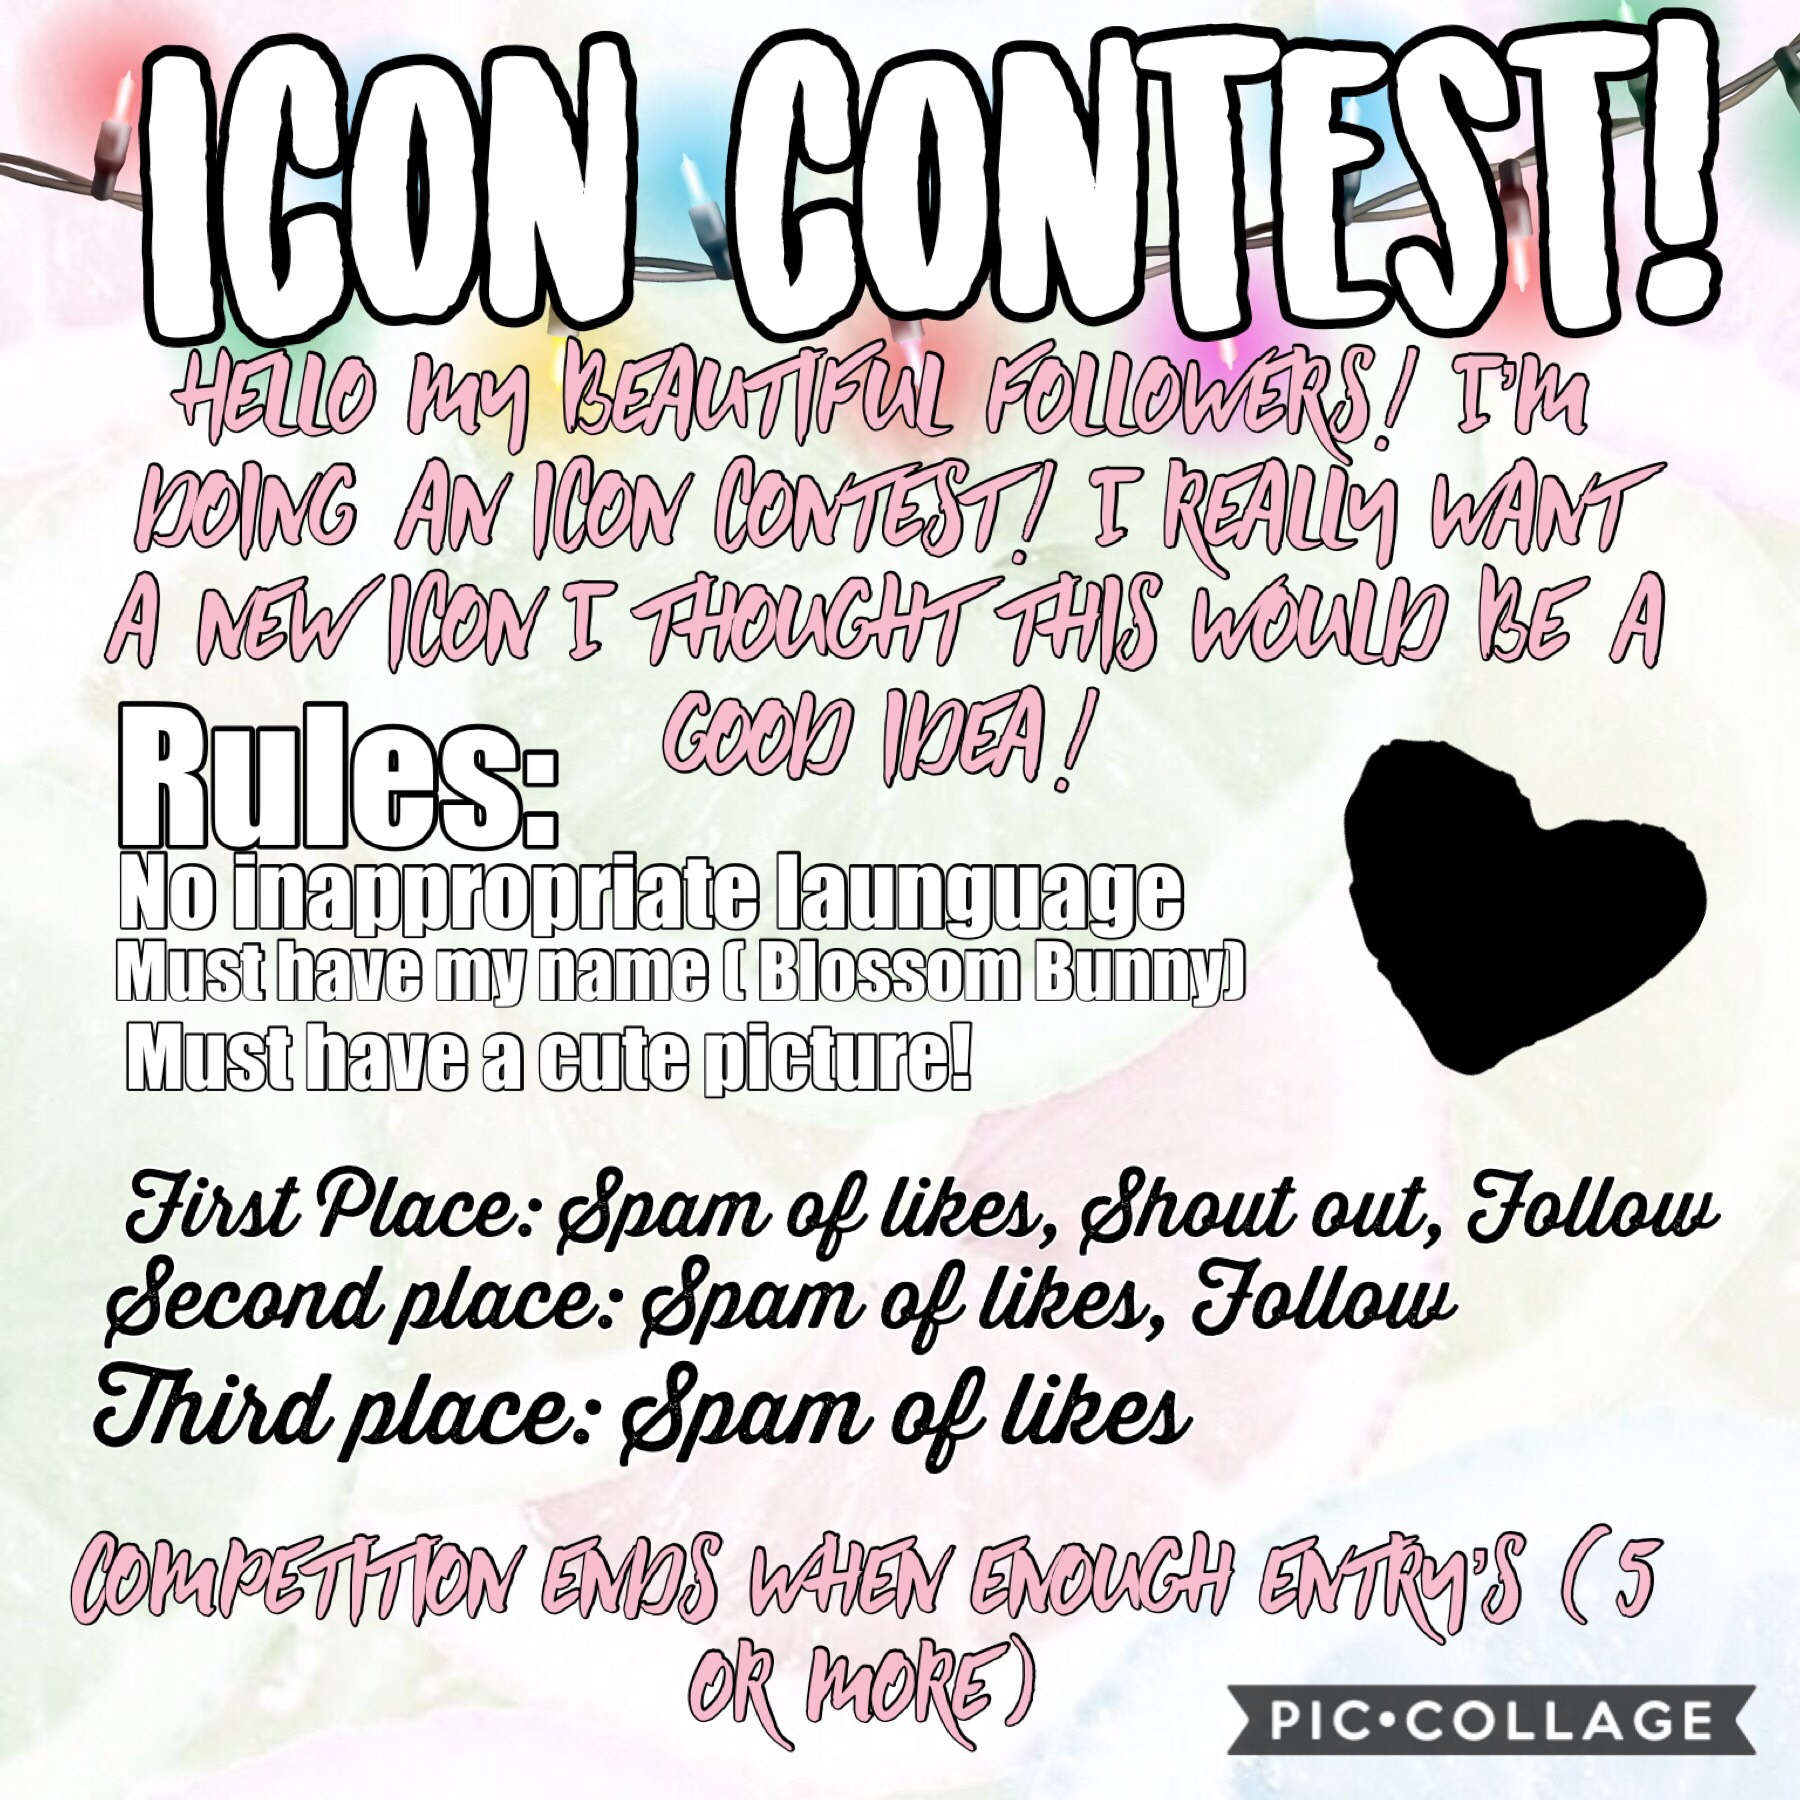 Hello everybody! Please enter cos I really want a new icon!😉 Again, THANK YOU SO MUCH TO ALL MY FOLLOWERS! 🤣😍🥰😘😚😝😎🤓🥳🤩🧐🤪😏😁😊🙃😍🥰 ( I feel like no one will enter 🥺 that would be so sad!)